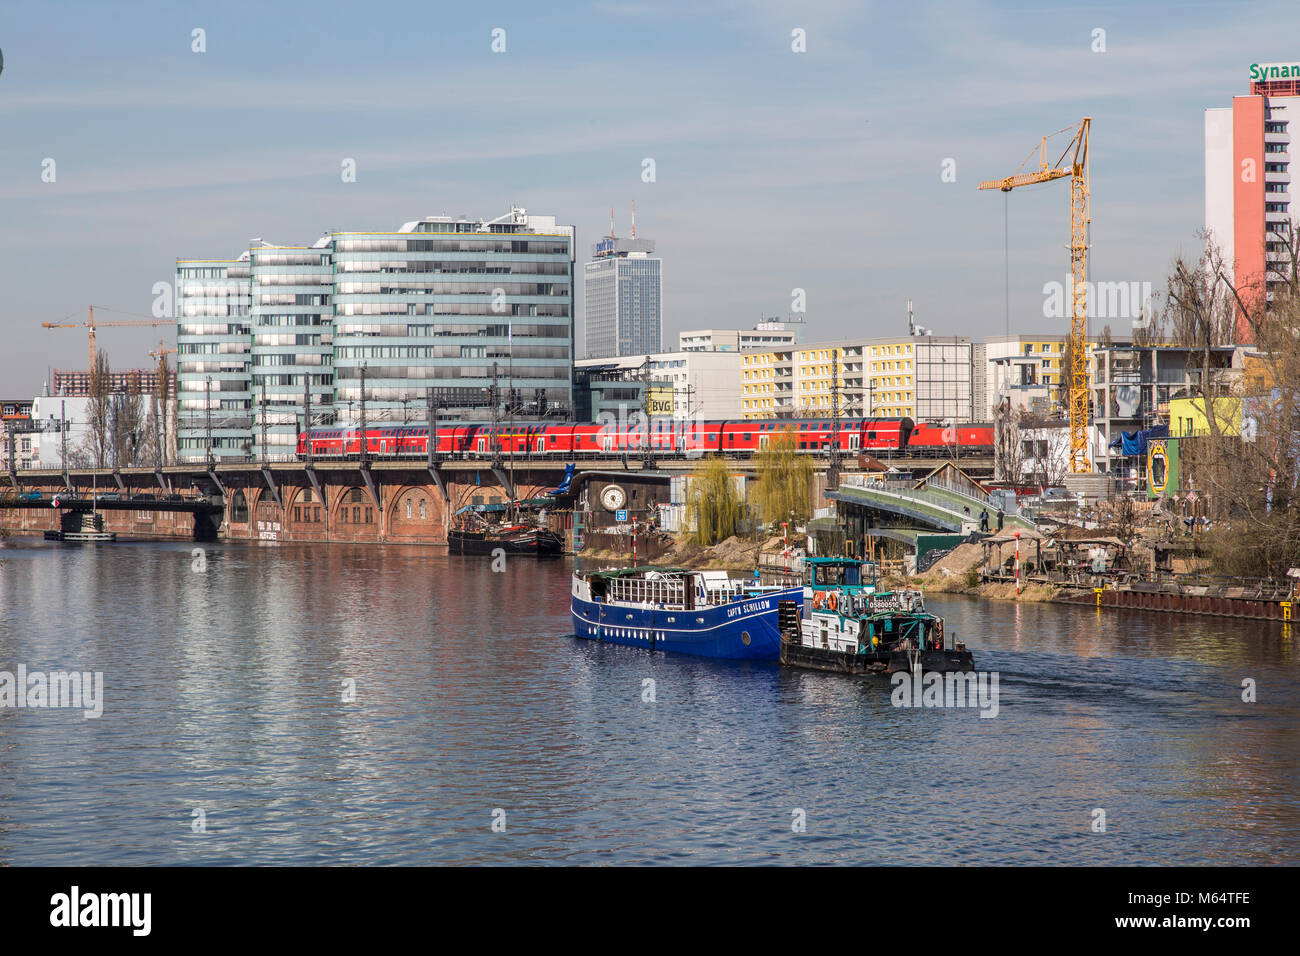 The River Spree in Berlin, administration building of the Berliner Verkehrsbetriebe, BVG, local train, Germany Stock Photo